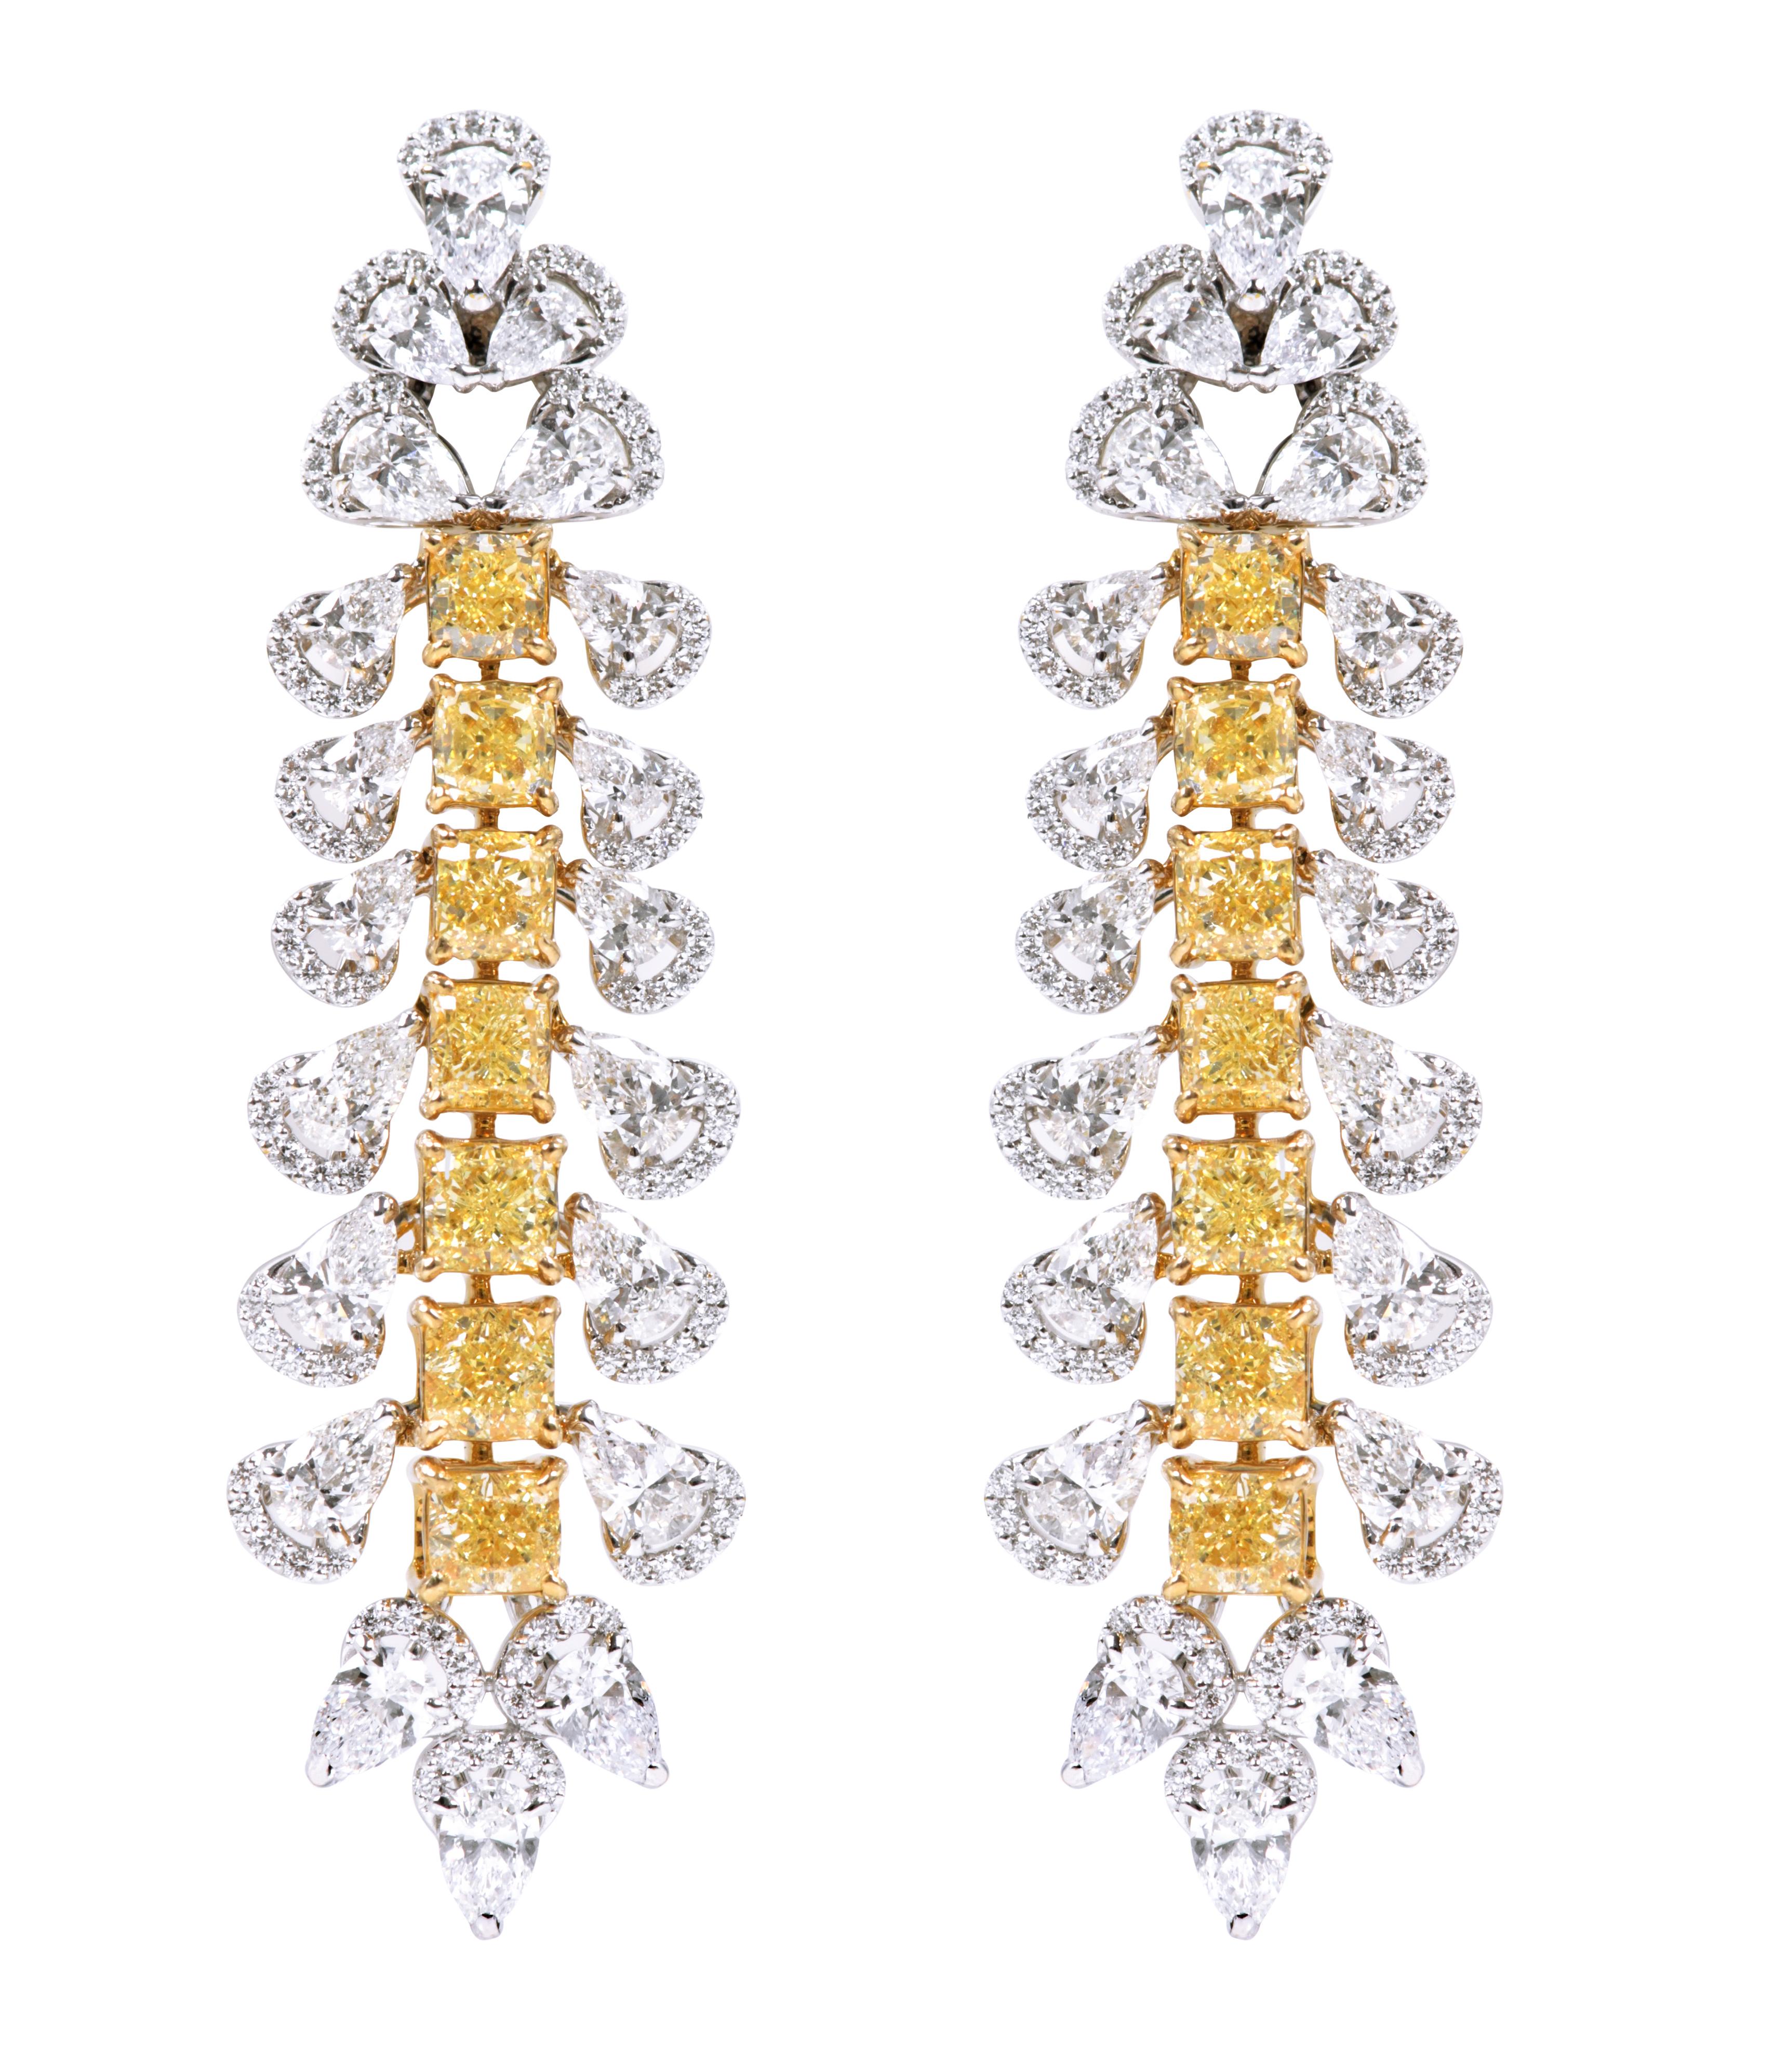 18 Karat Gold 13.31 Carat Yellow and White Diamond Solitaires Cocktail Earrings For Sale 2